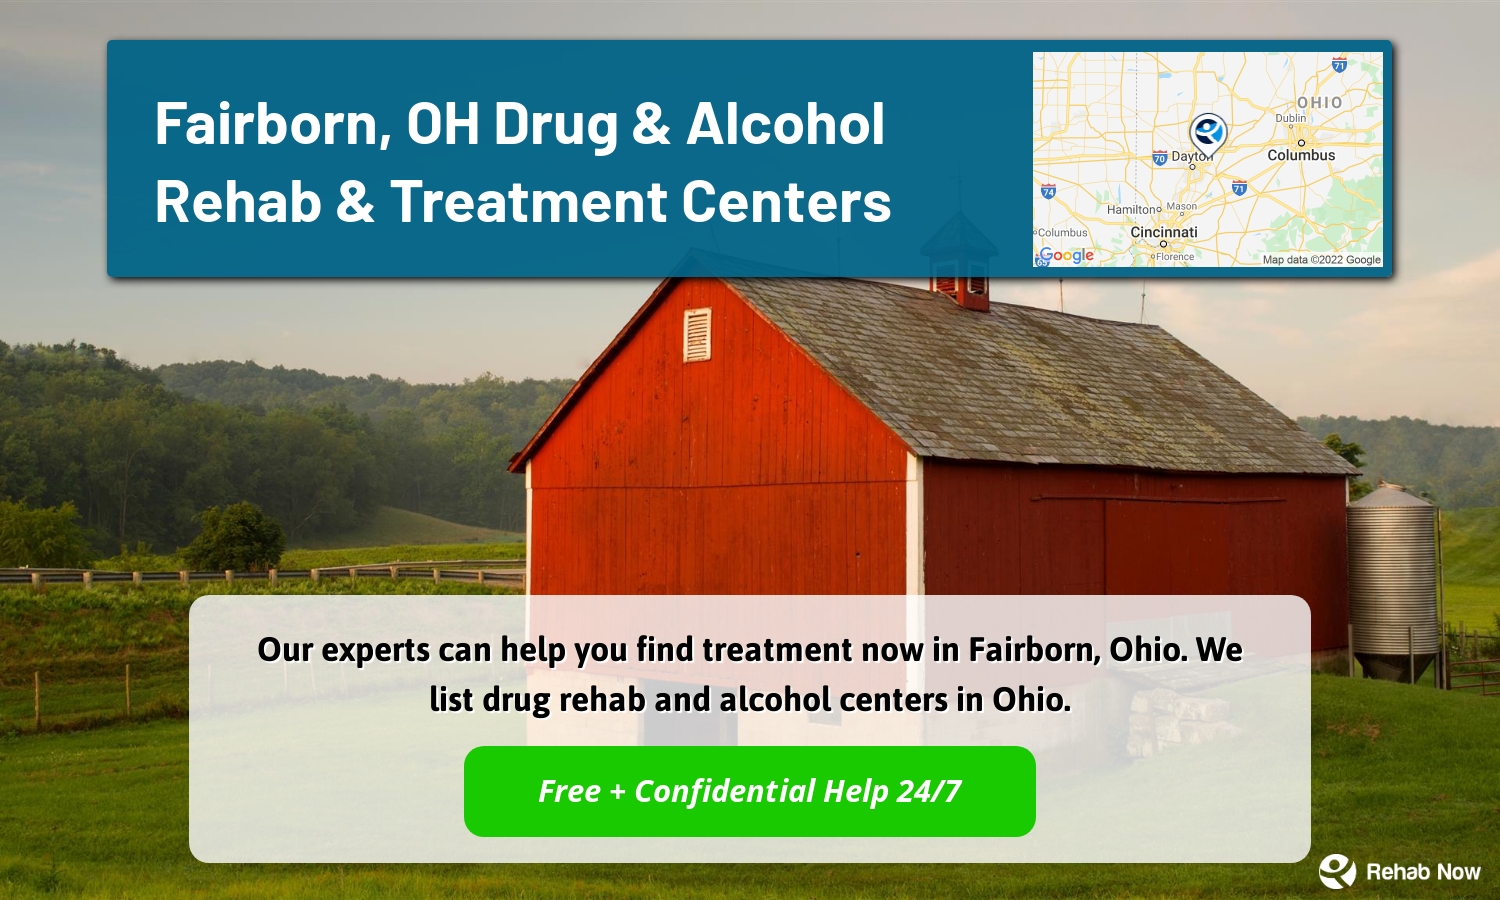 Our experts can help you find treatment now in Fairborn, Ohio. We list drug rehab and alcohol centers in Ohio.